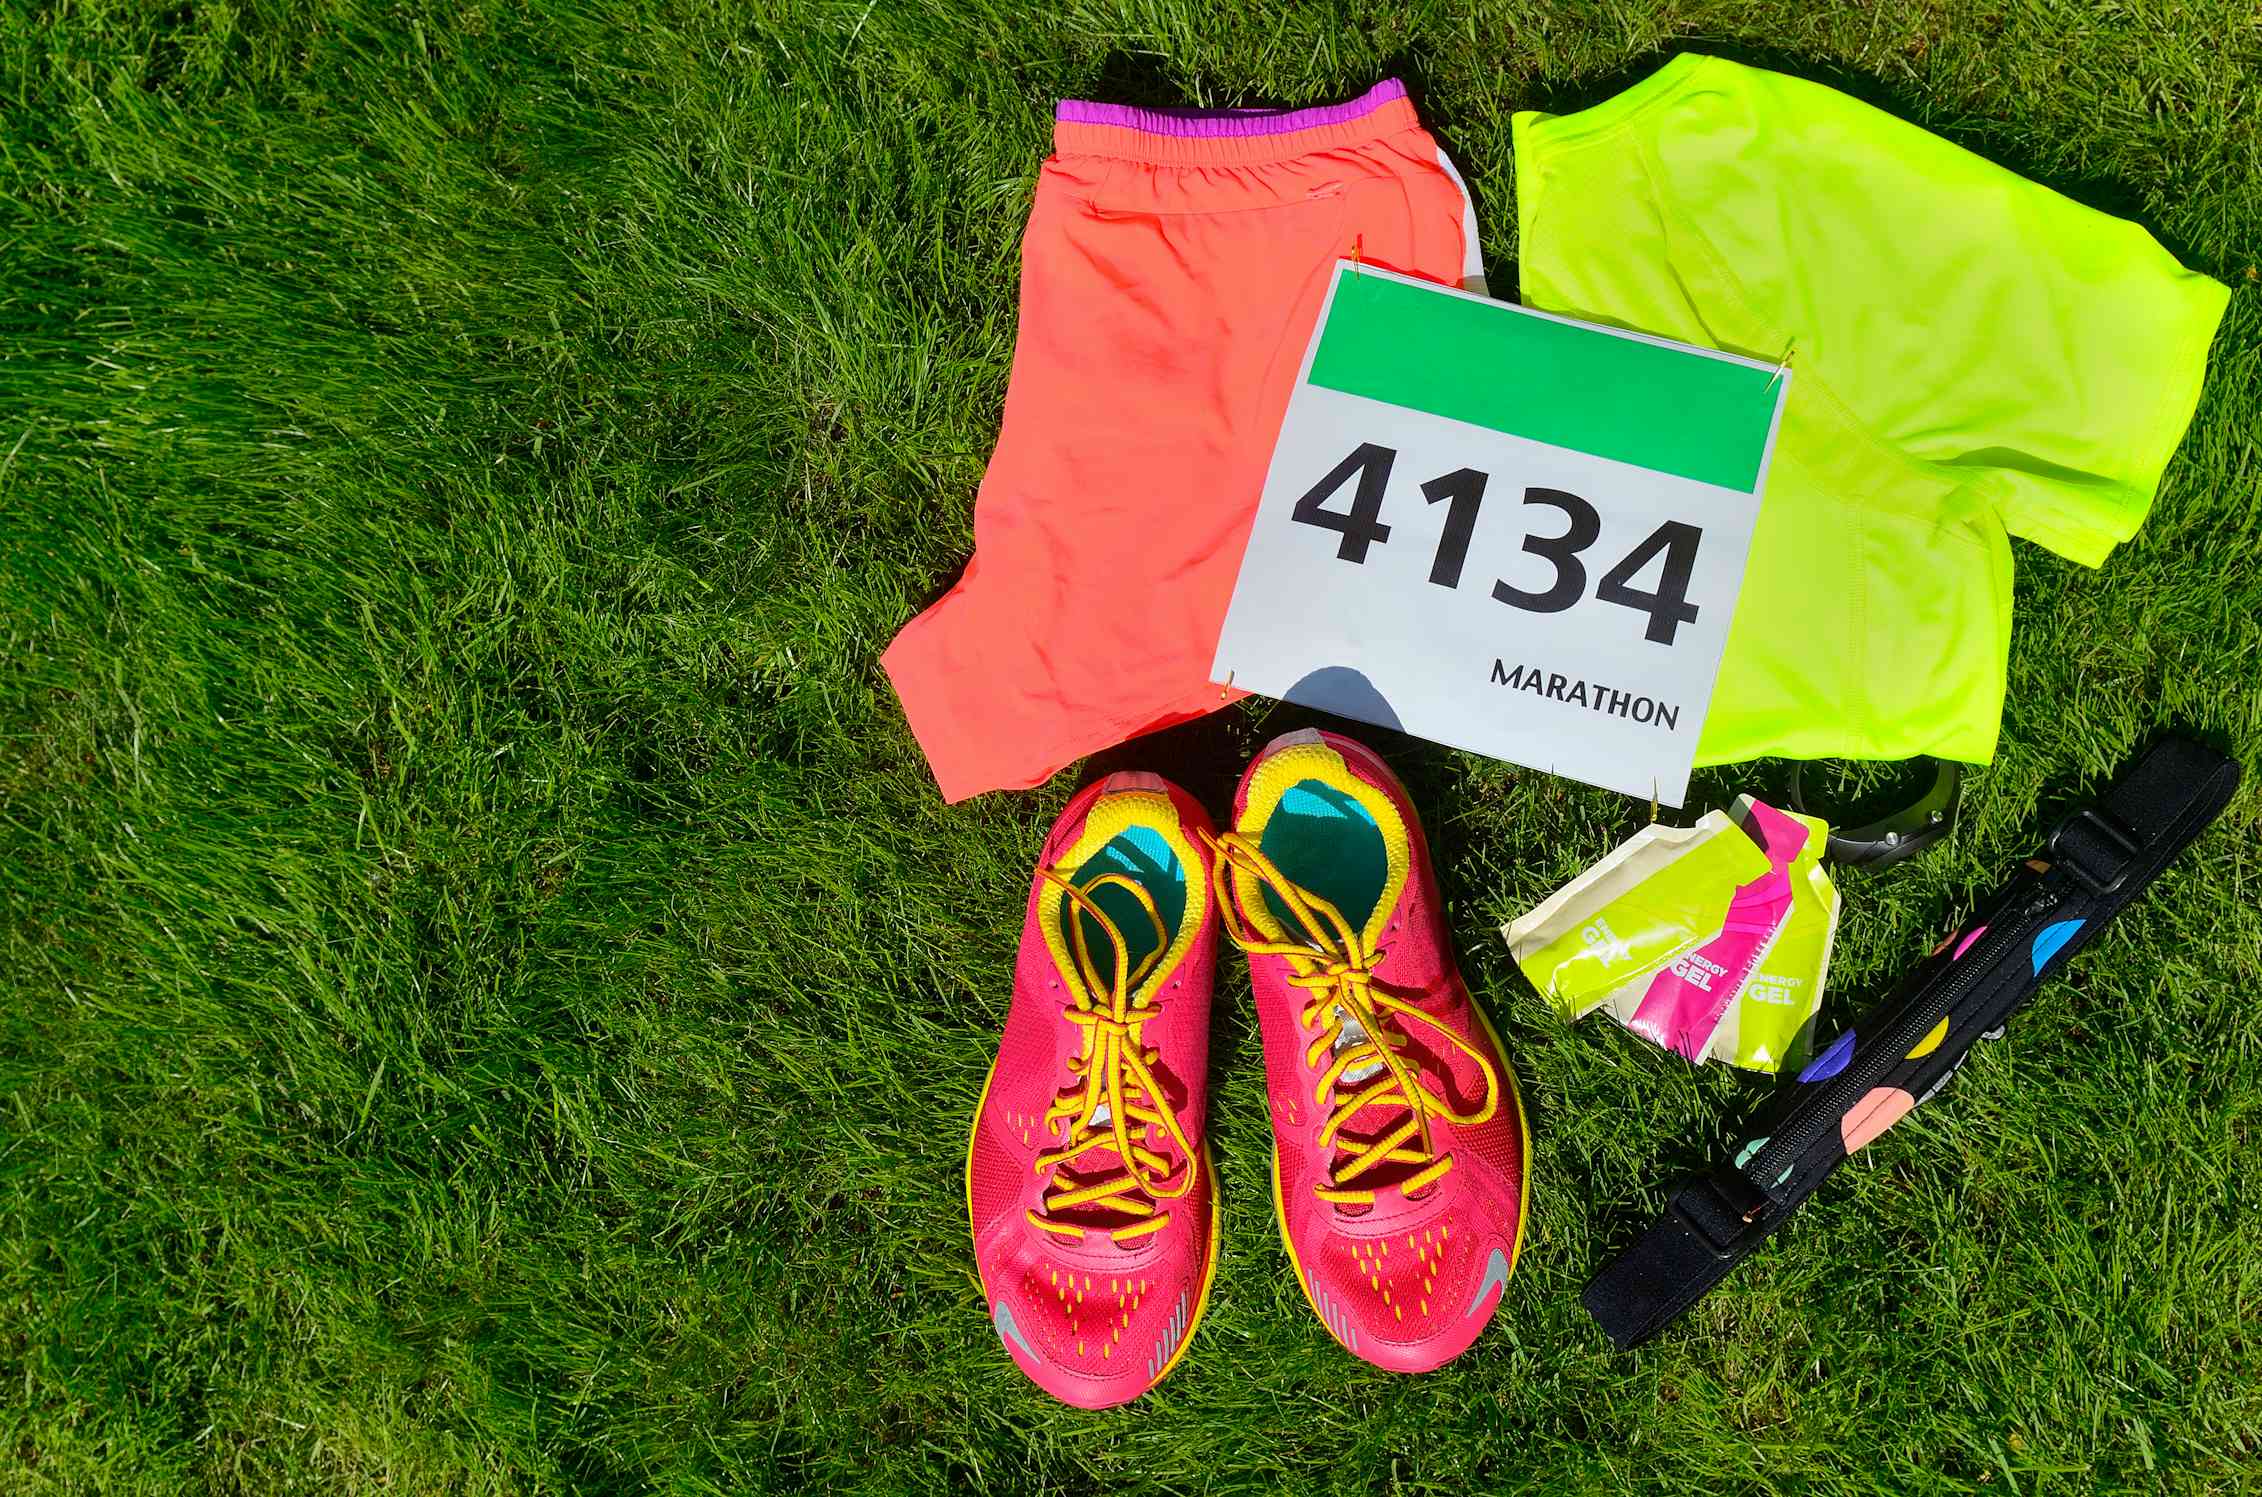 Runners kit including clothes, shoes, energy gels and competitor bib on grass